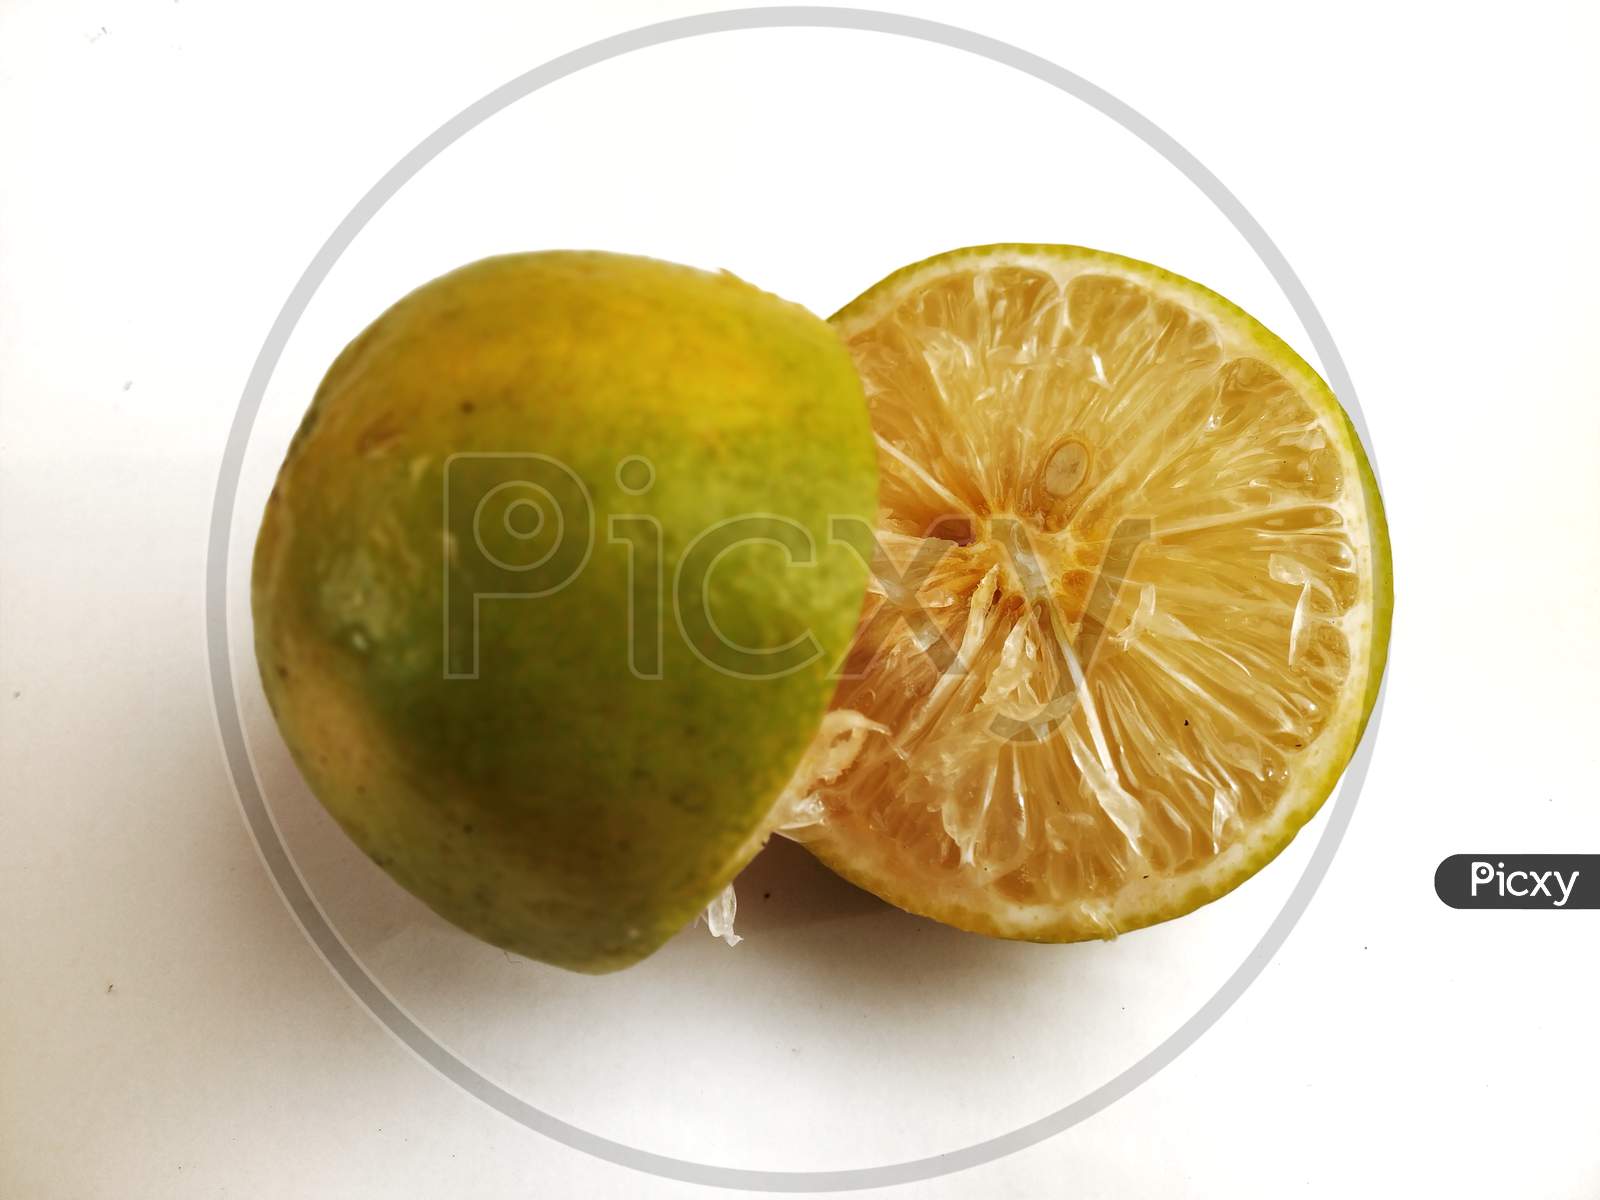 Photo Of Two Piece Of Mosambi, Also Known As Sweet Lemon